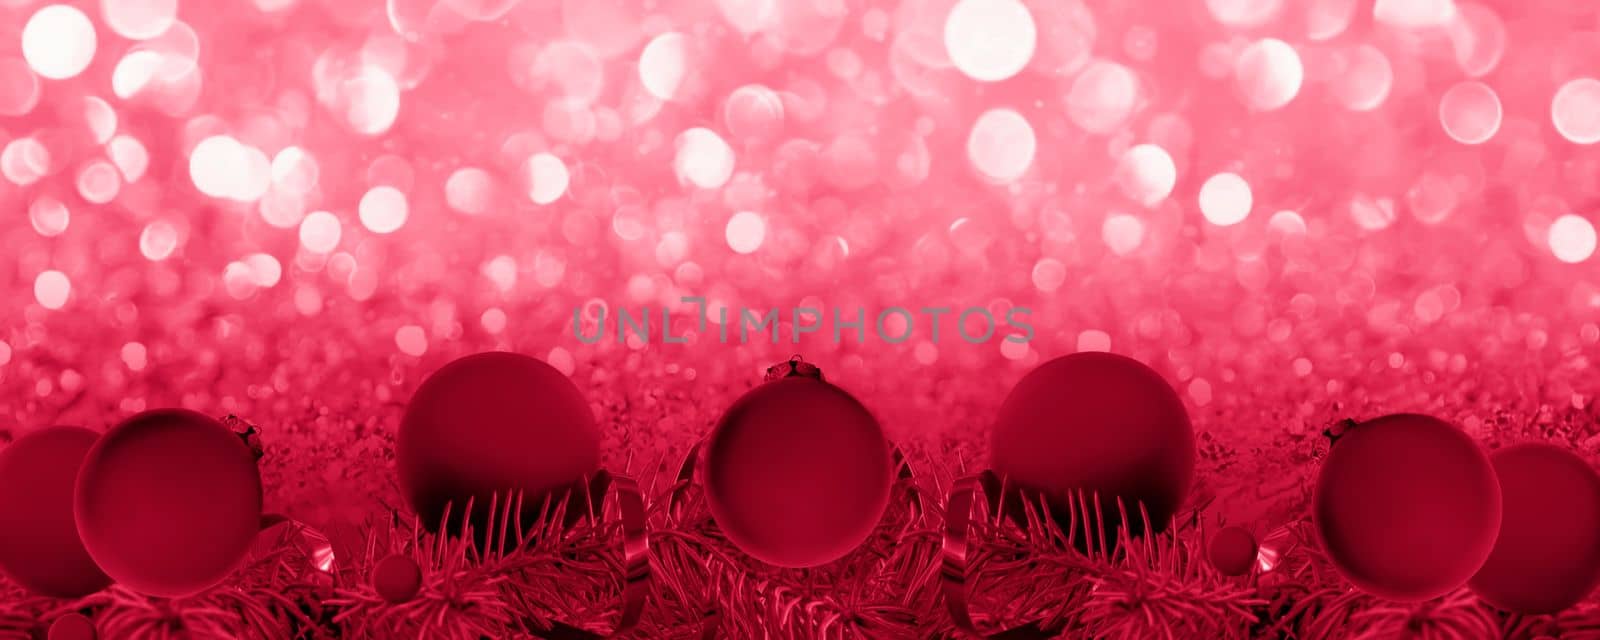 Christmas banner. Spruce branches and red balls on a shiny background. Christmas, holiday, greetings. Background for advertising and business. by Alina_Lebed